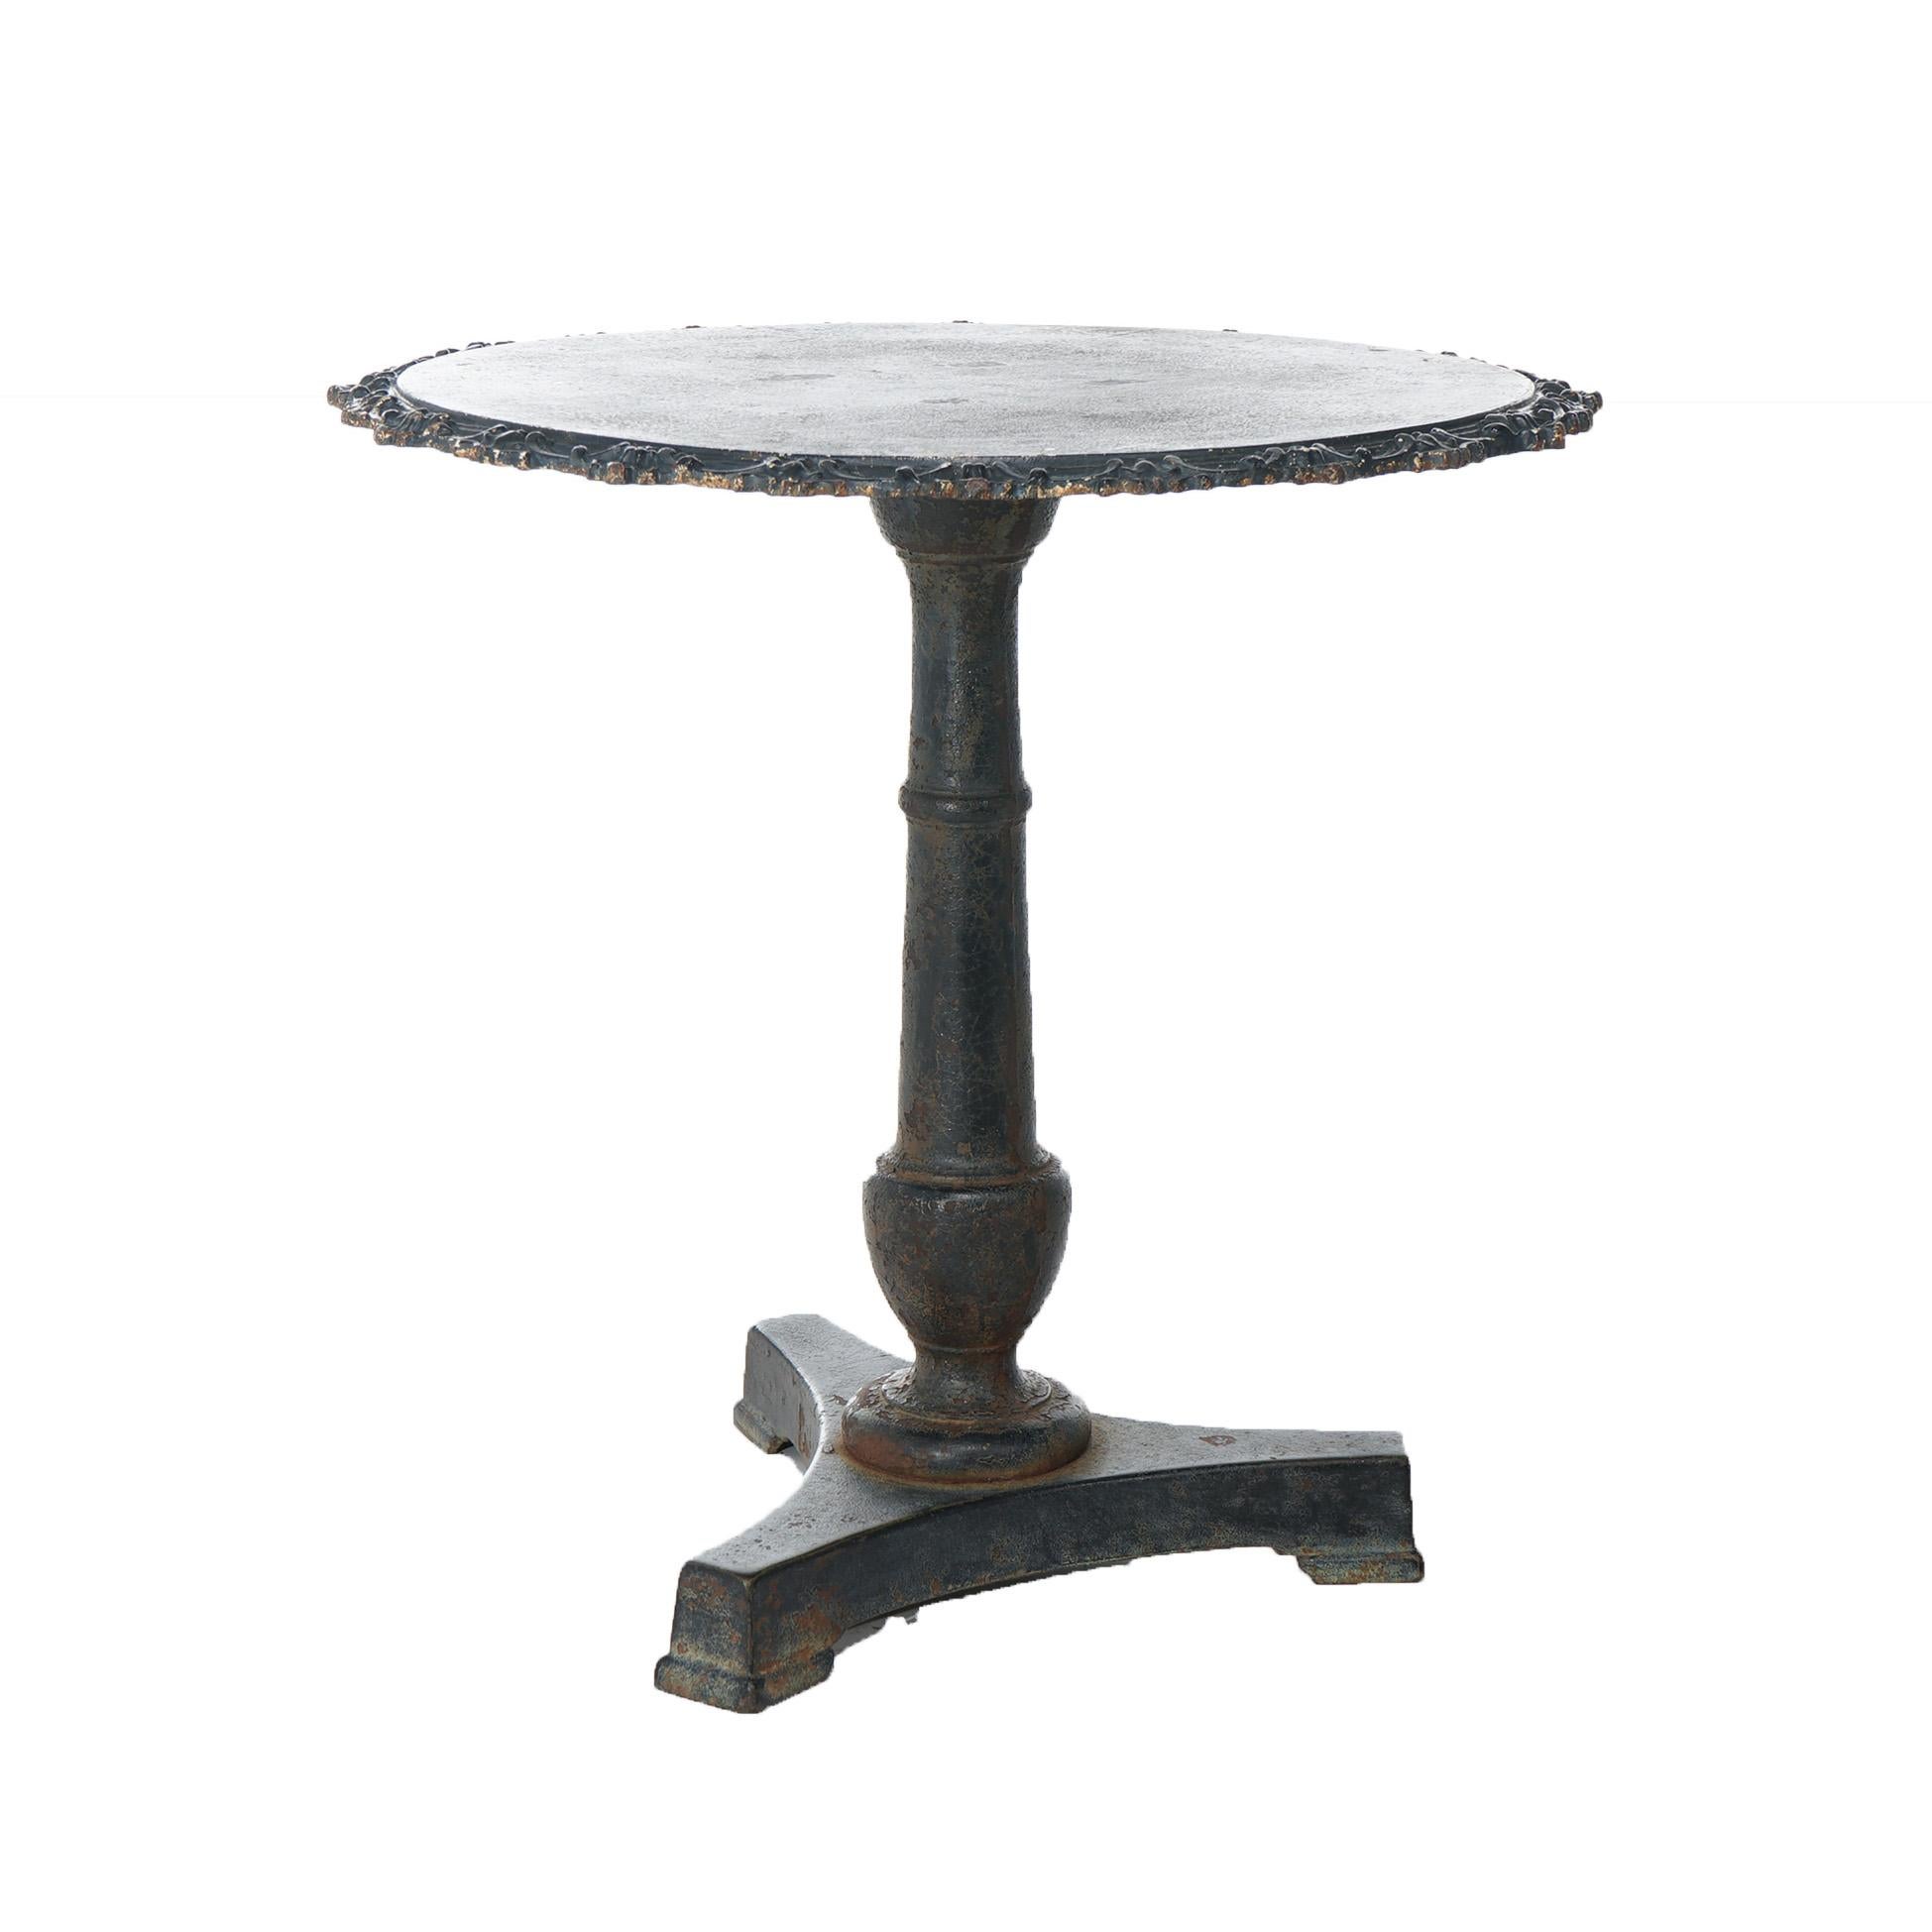 19th Century Antique Neoclassical Cast Iron Café Garden Table by Rudy Groeger Foundry 19thC For Sale